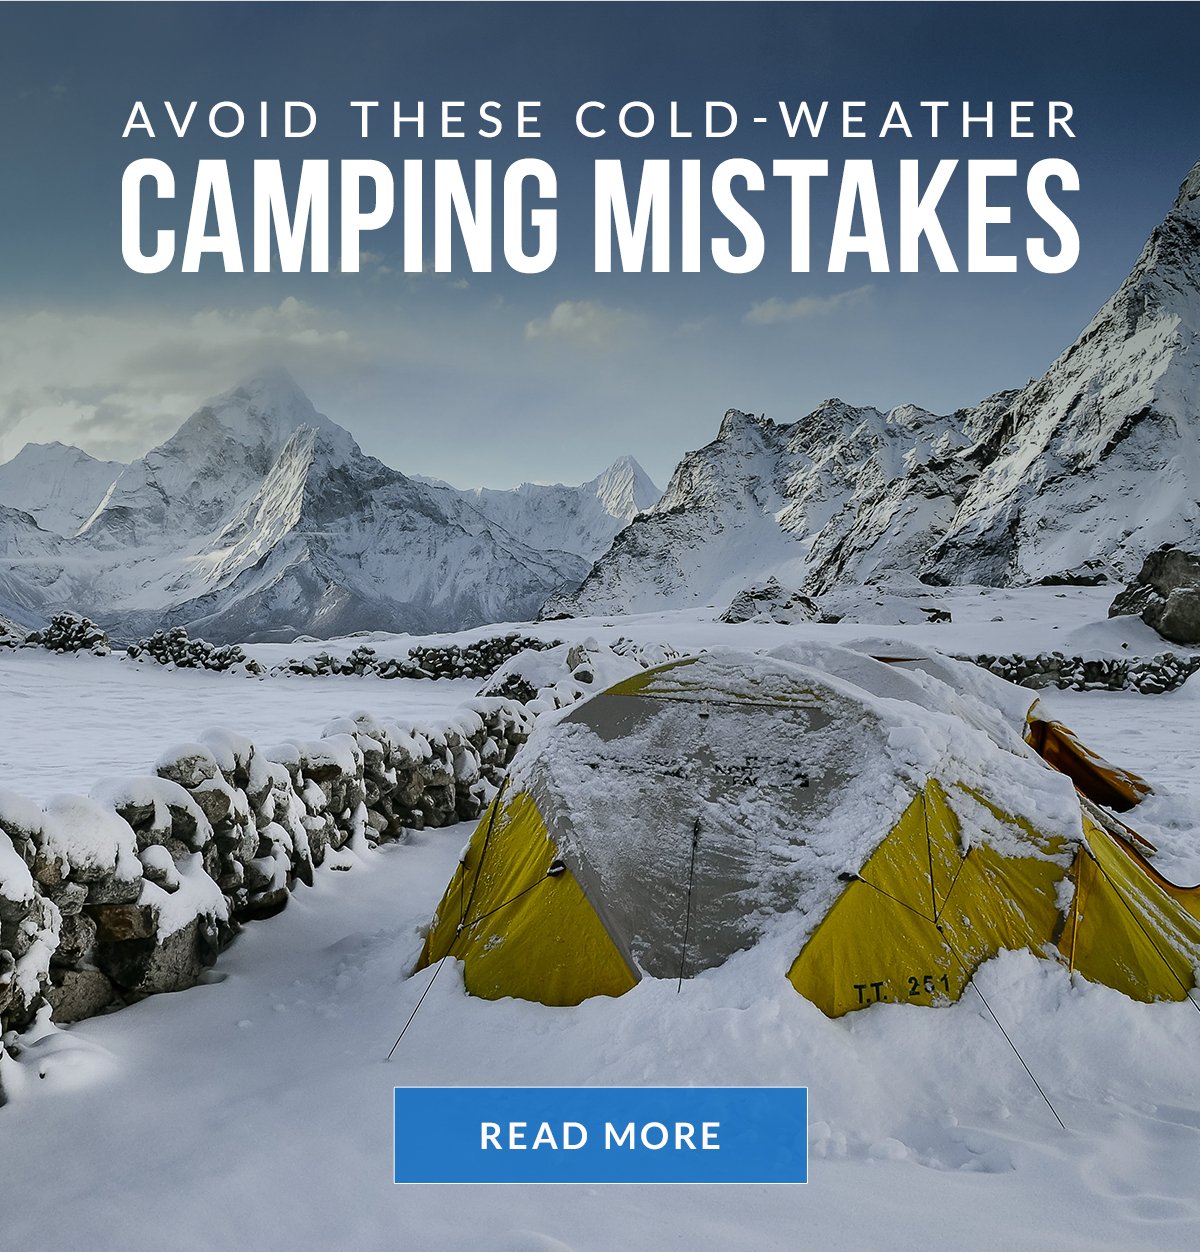 Avoid These Winter Camping Mistakes - Read More